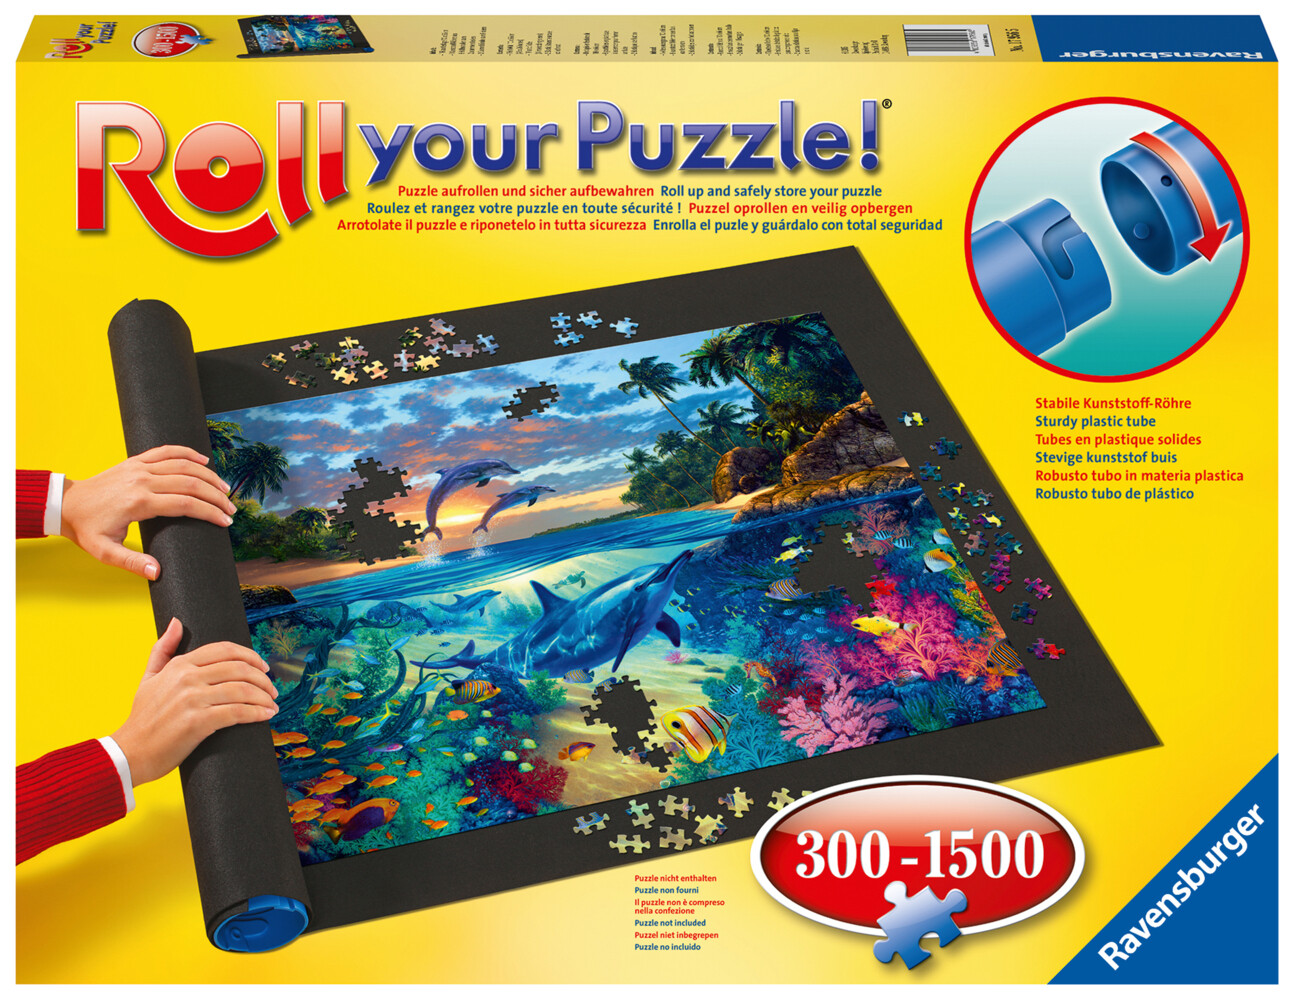 Roll your Puzzle! als Spielware